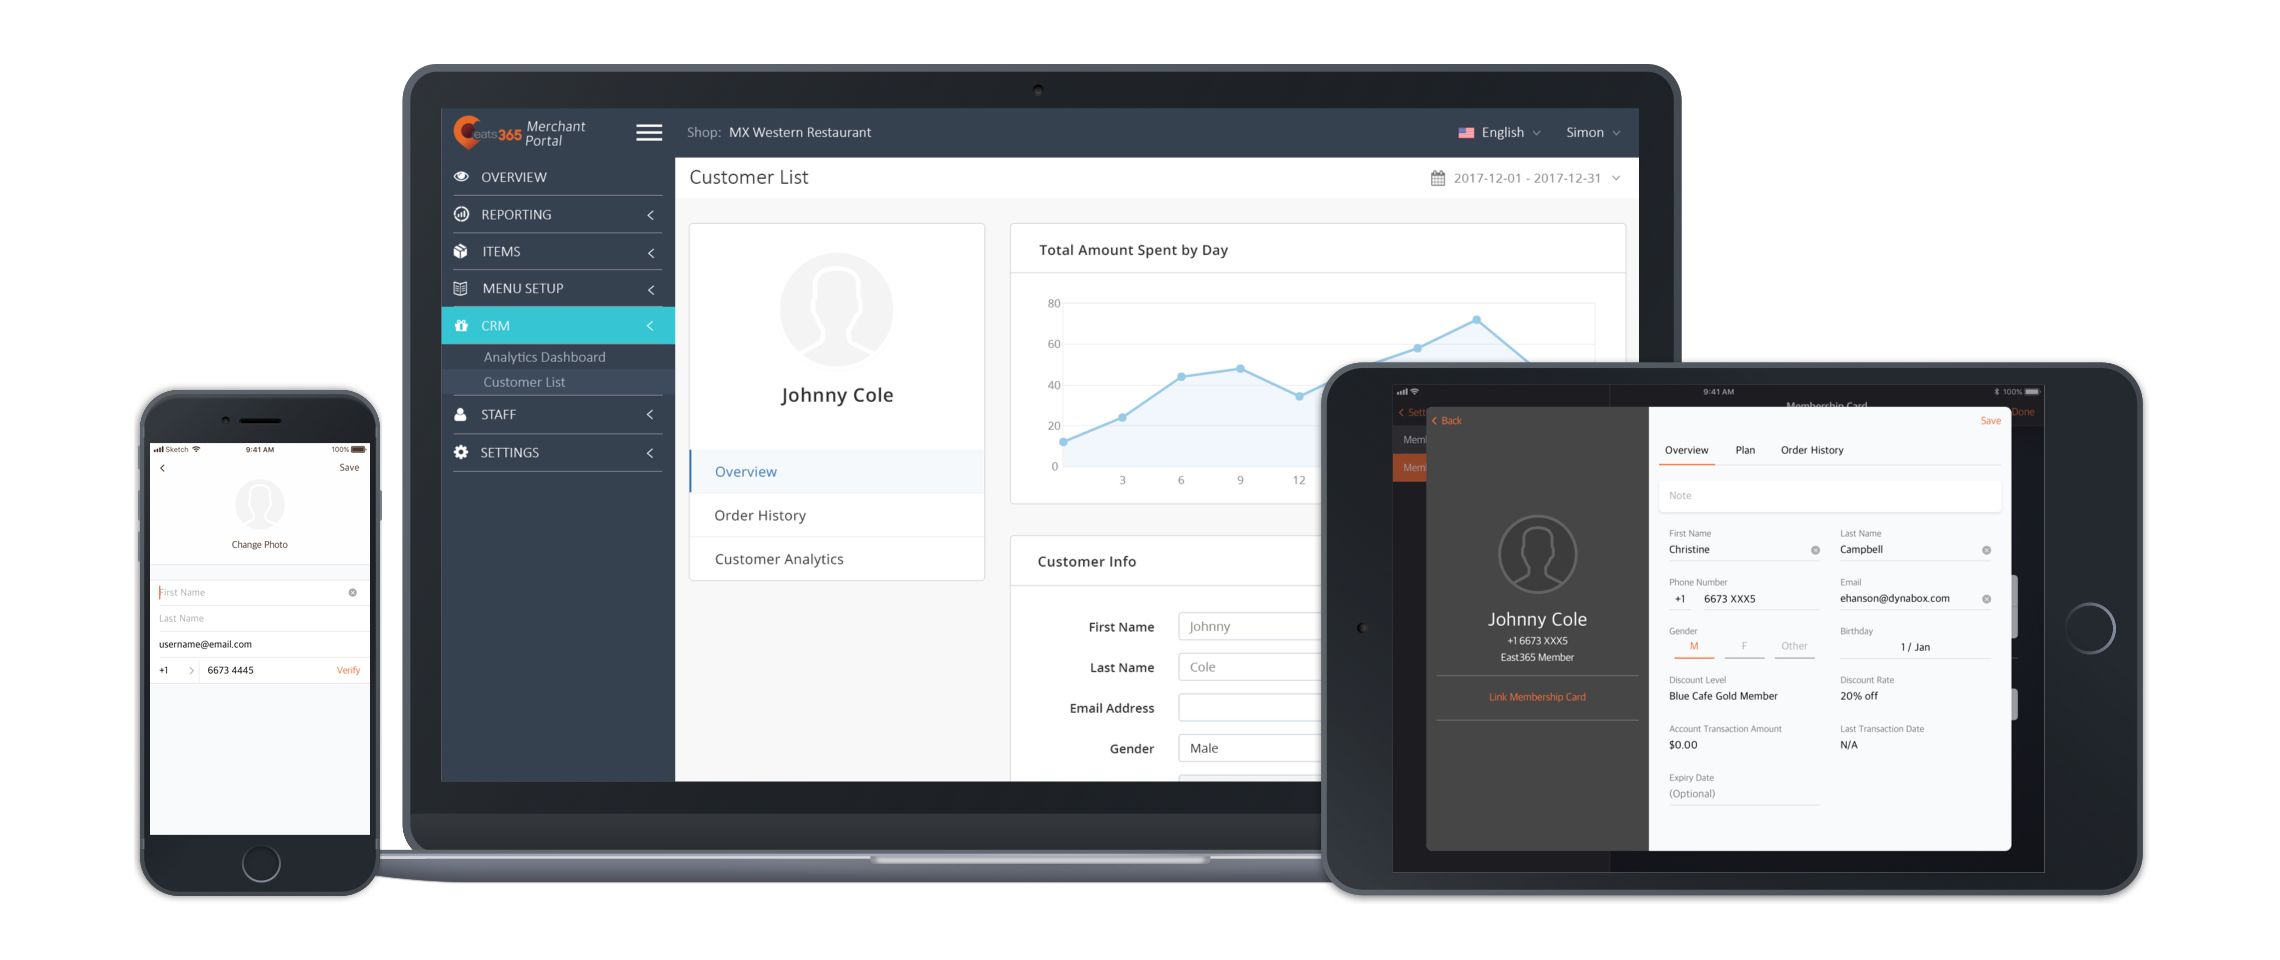 View your analytics on multiple smart devices